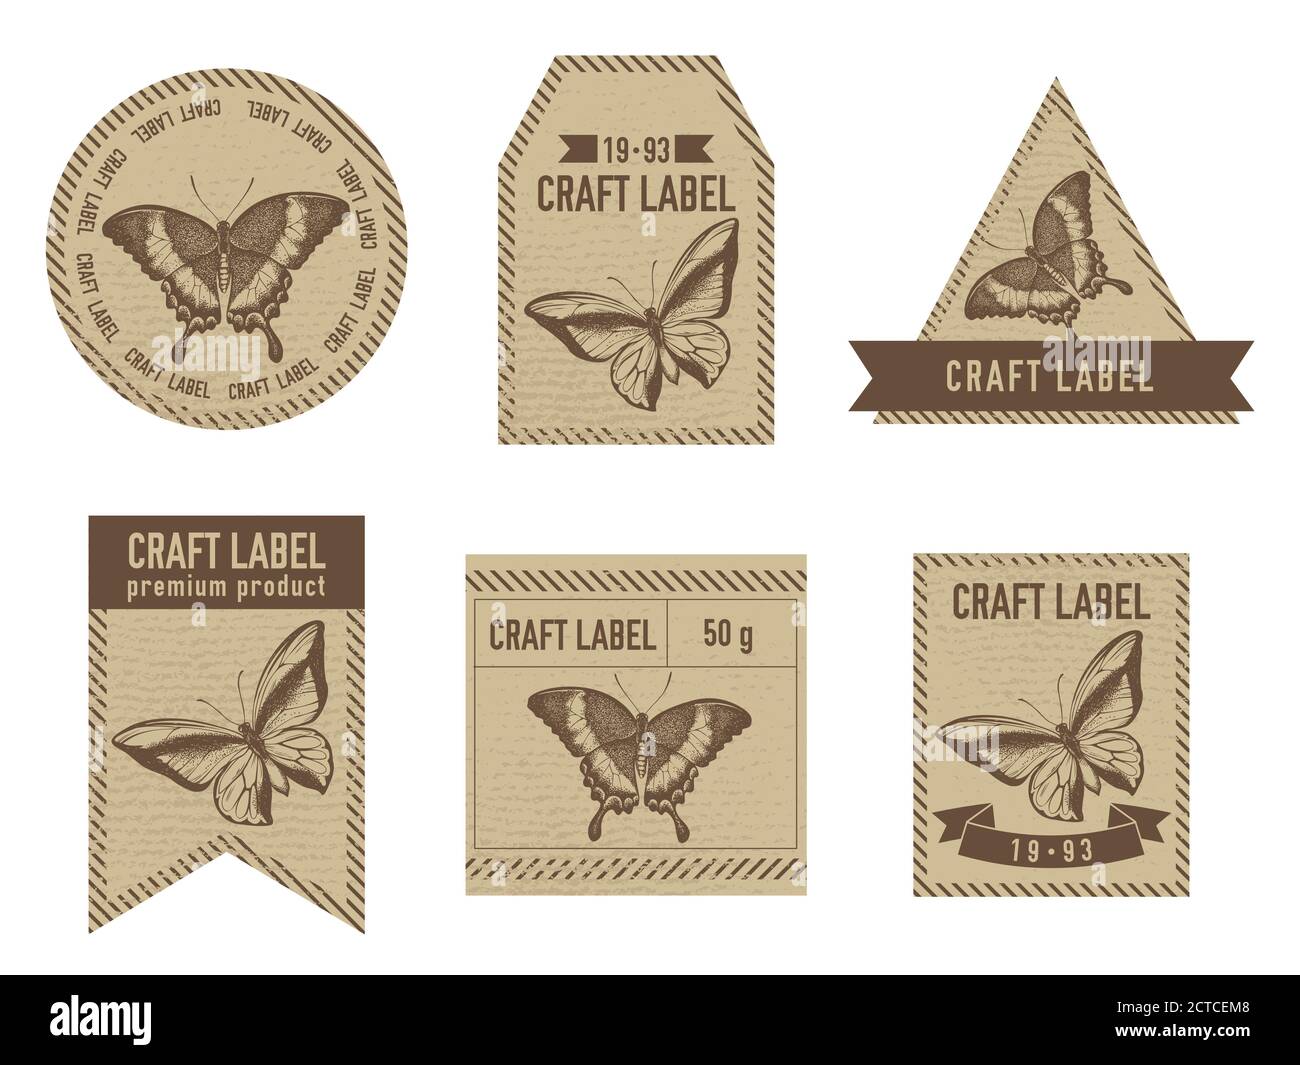 Craft labels vintage design with illustration of emerald swallowtail, swallowtail butterfly Stock Vector